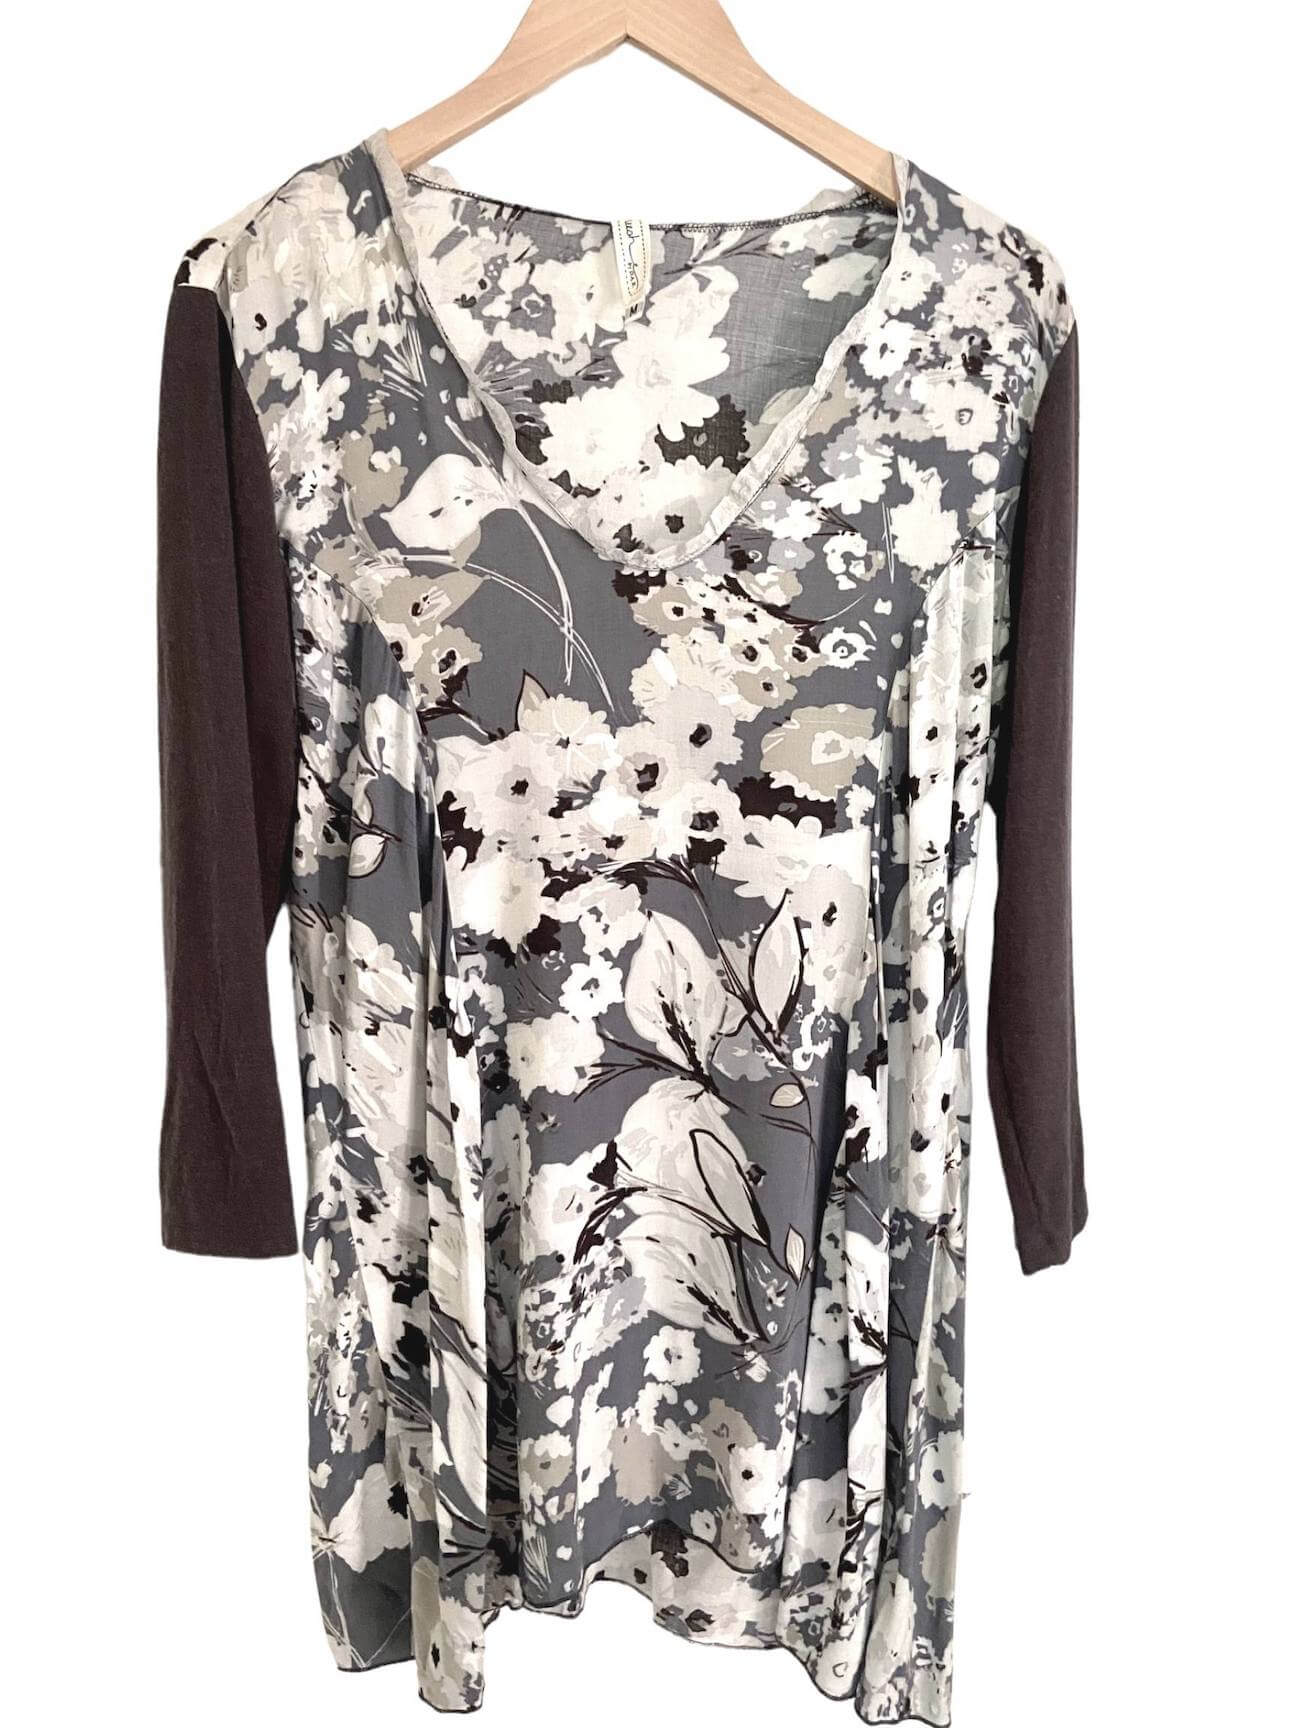 Soft Summer NEESH by D.A.R. for Anthropologie floral print tunic